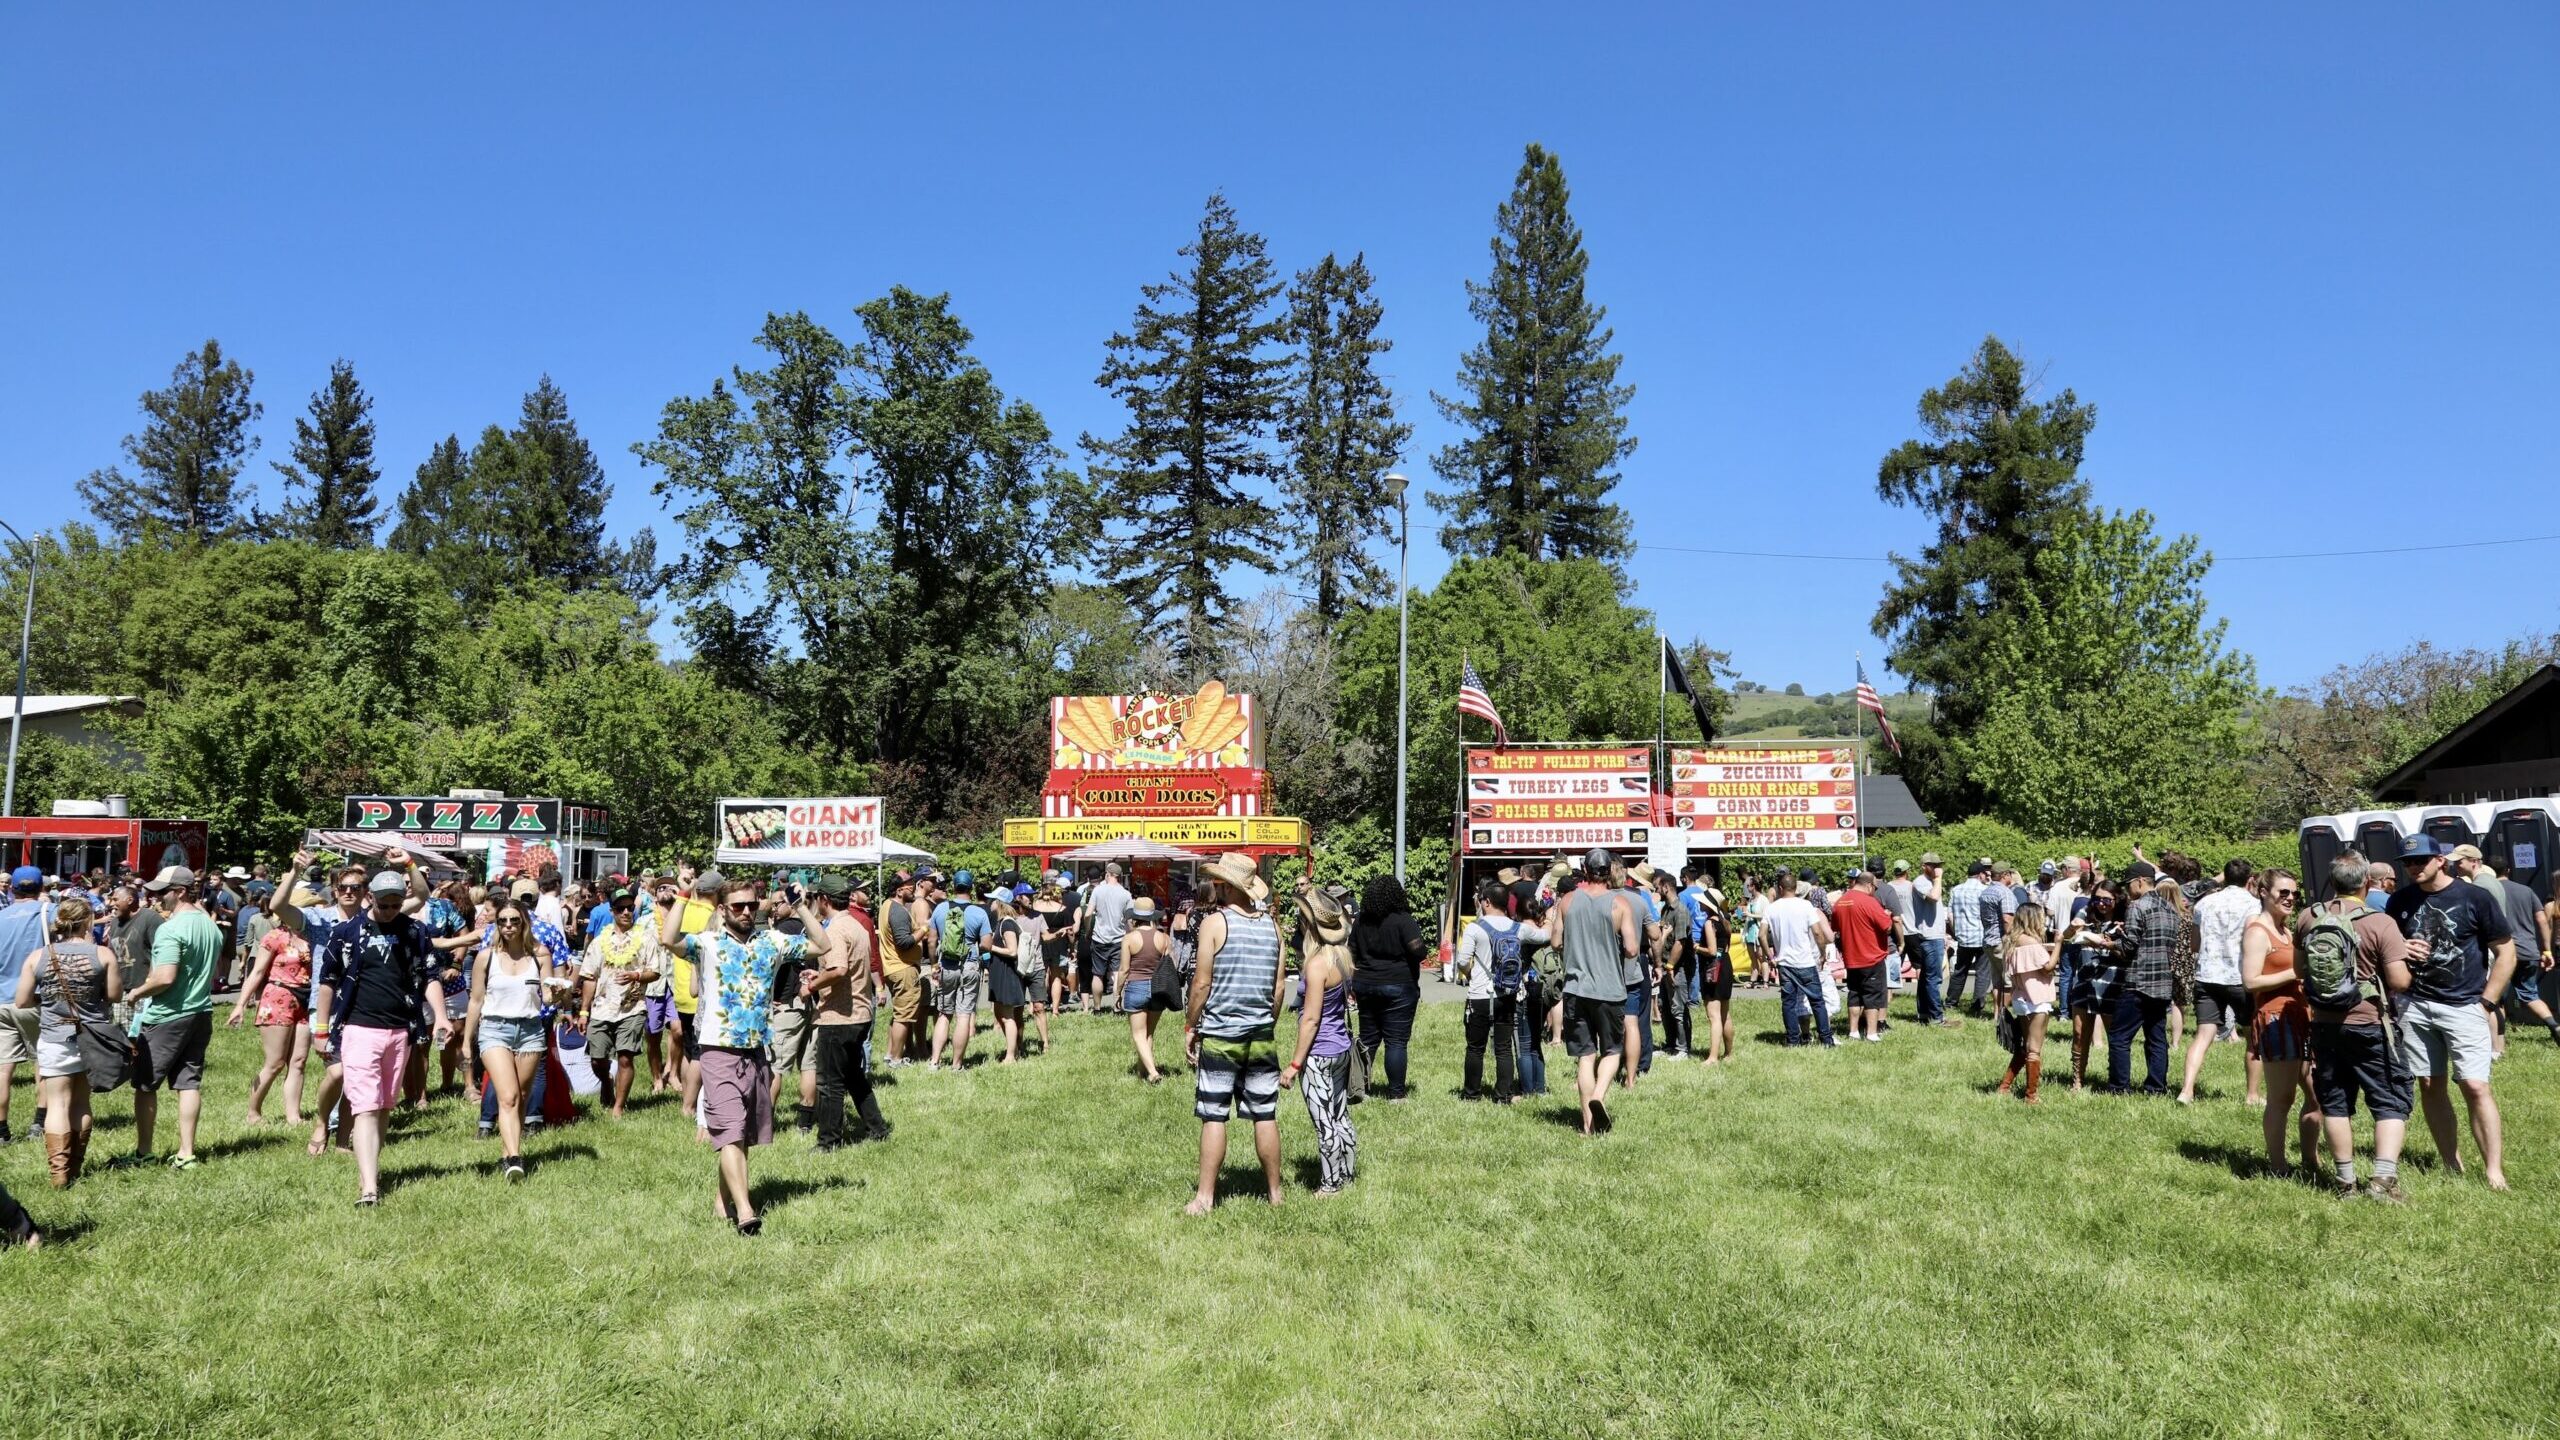 Boonville Beer Festival 2023 Dates Announced : Anderson Valley Brewing Company